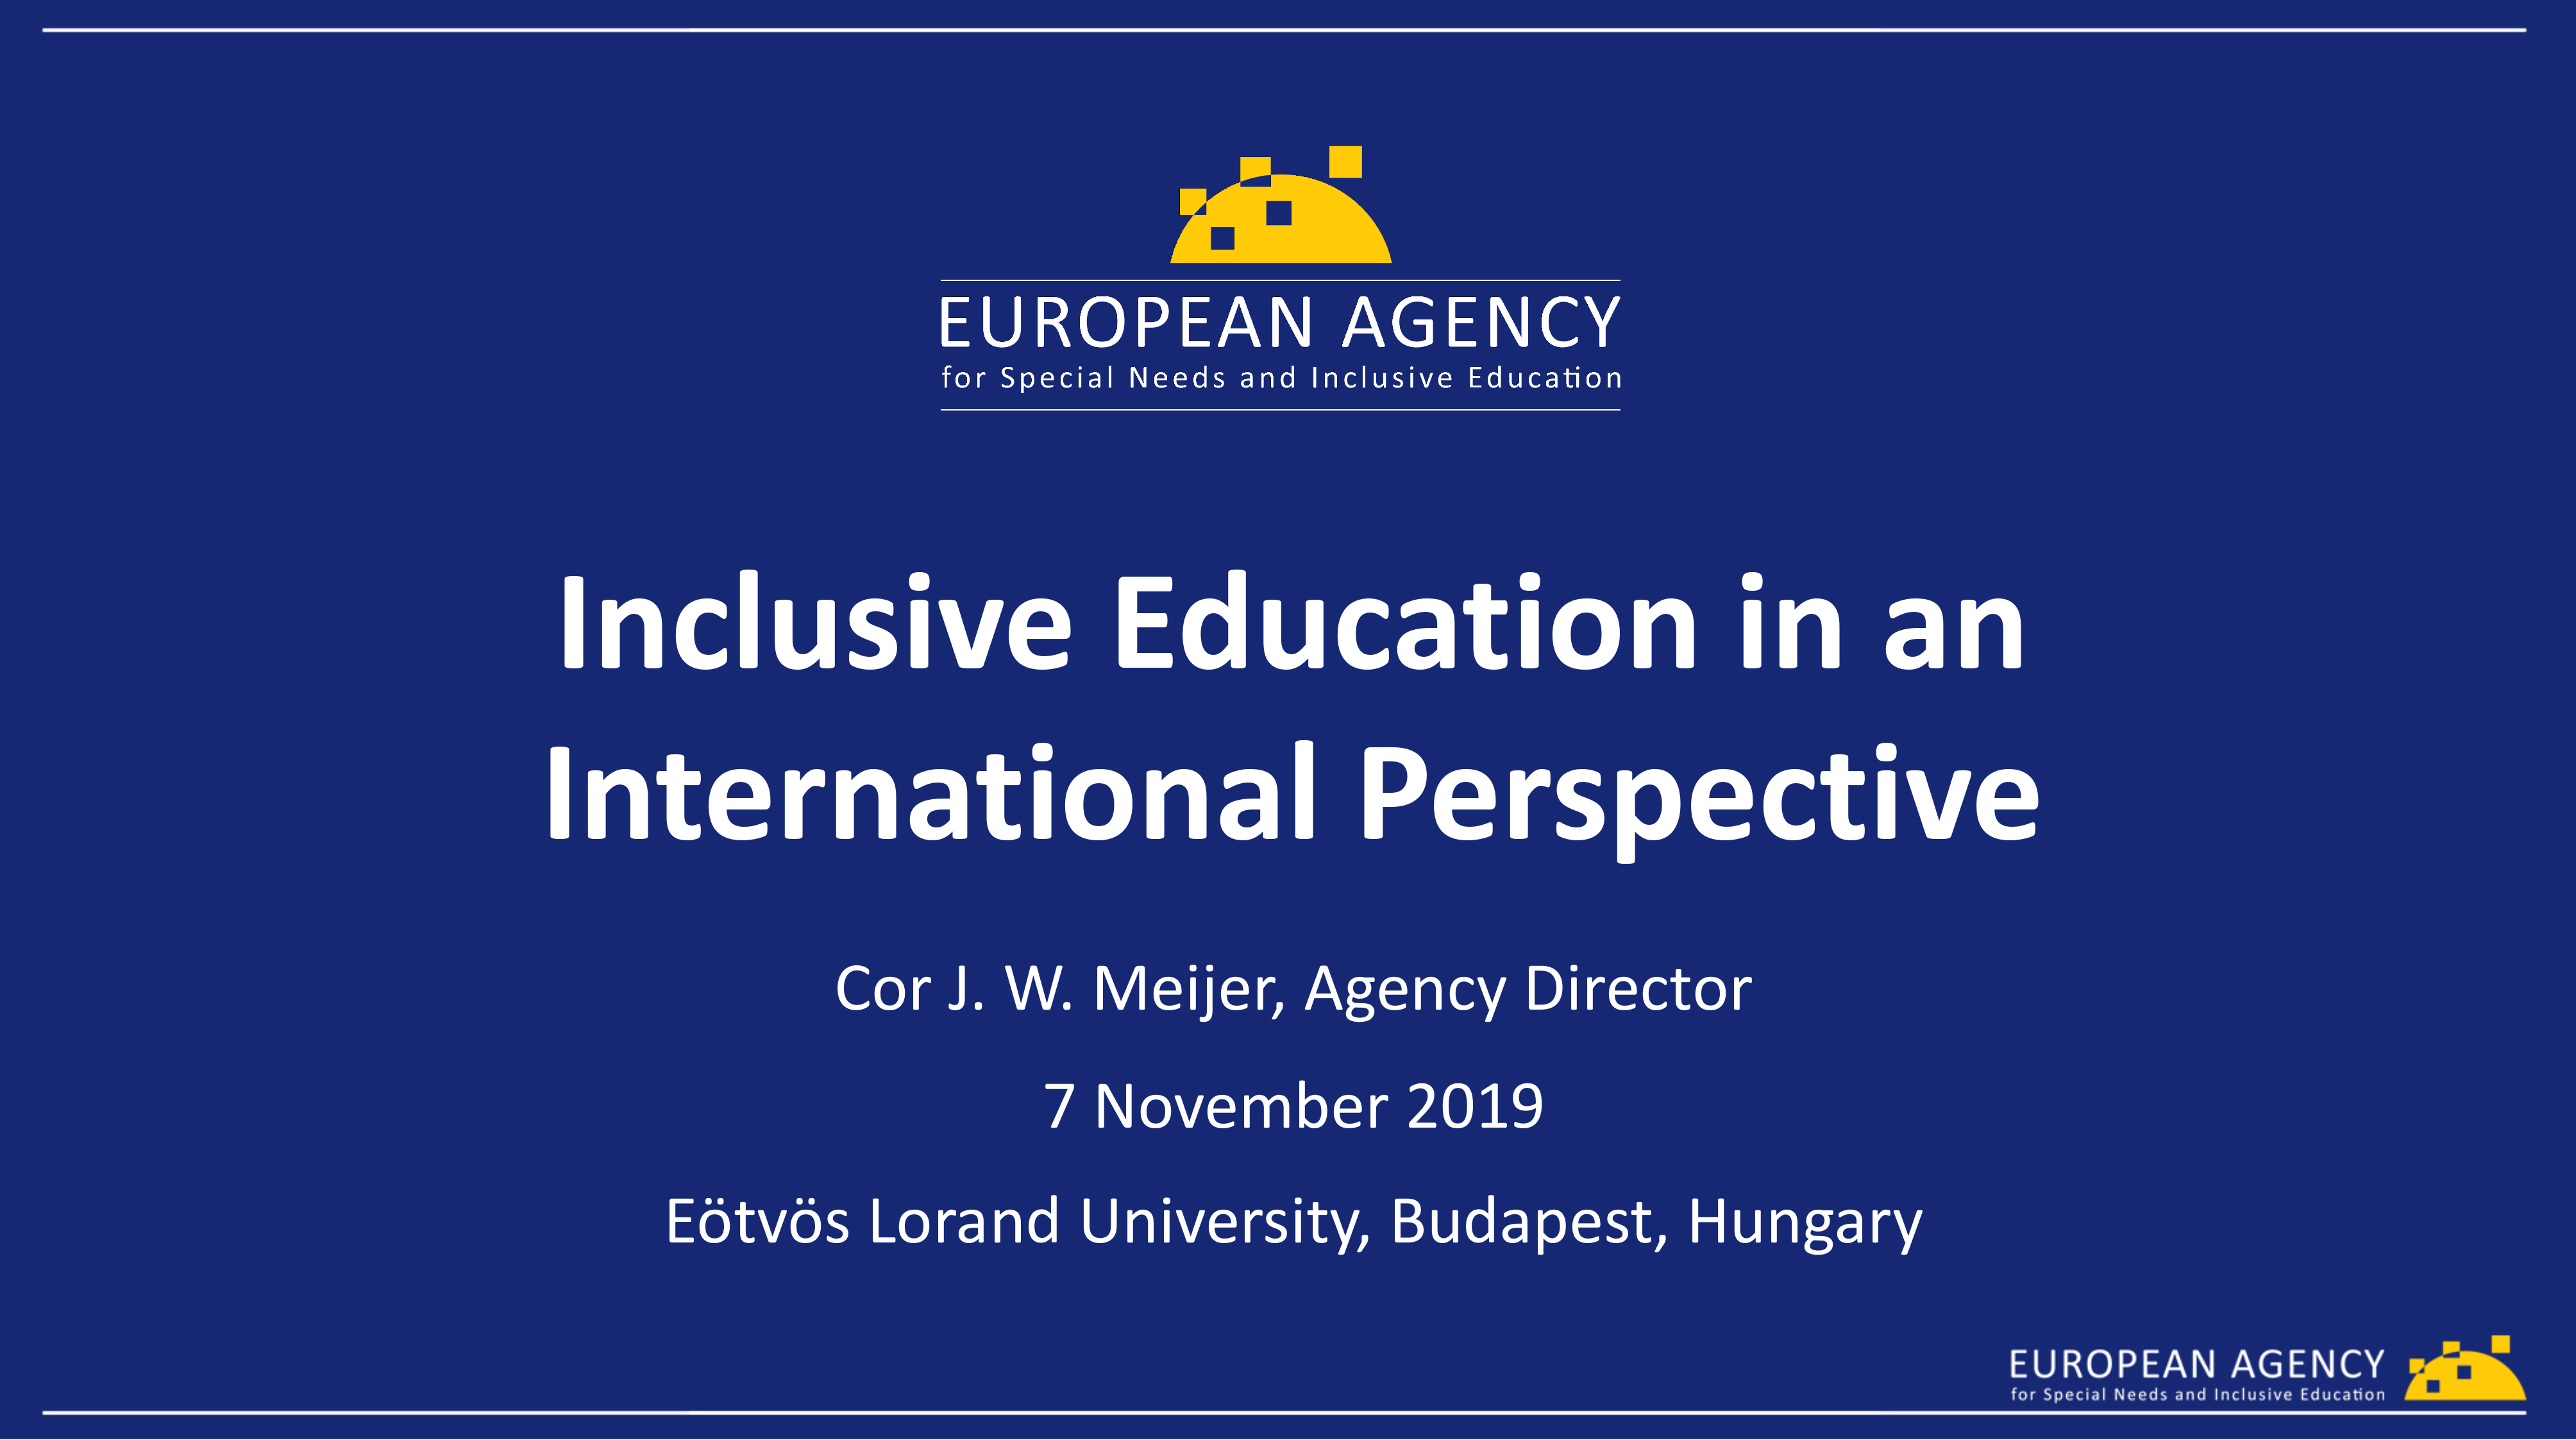 Inclusive Education in an International Perspective